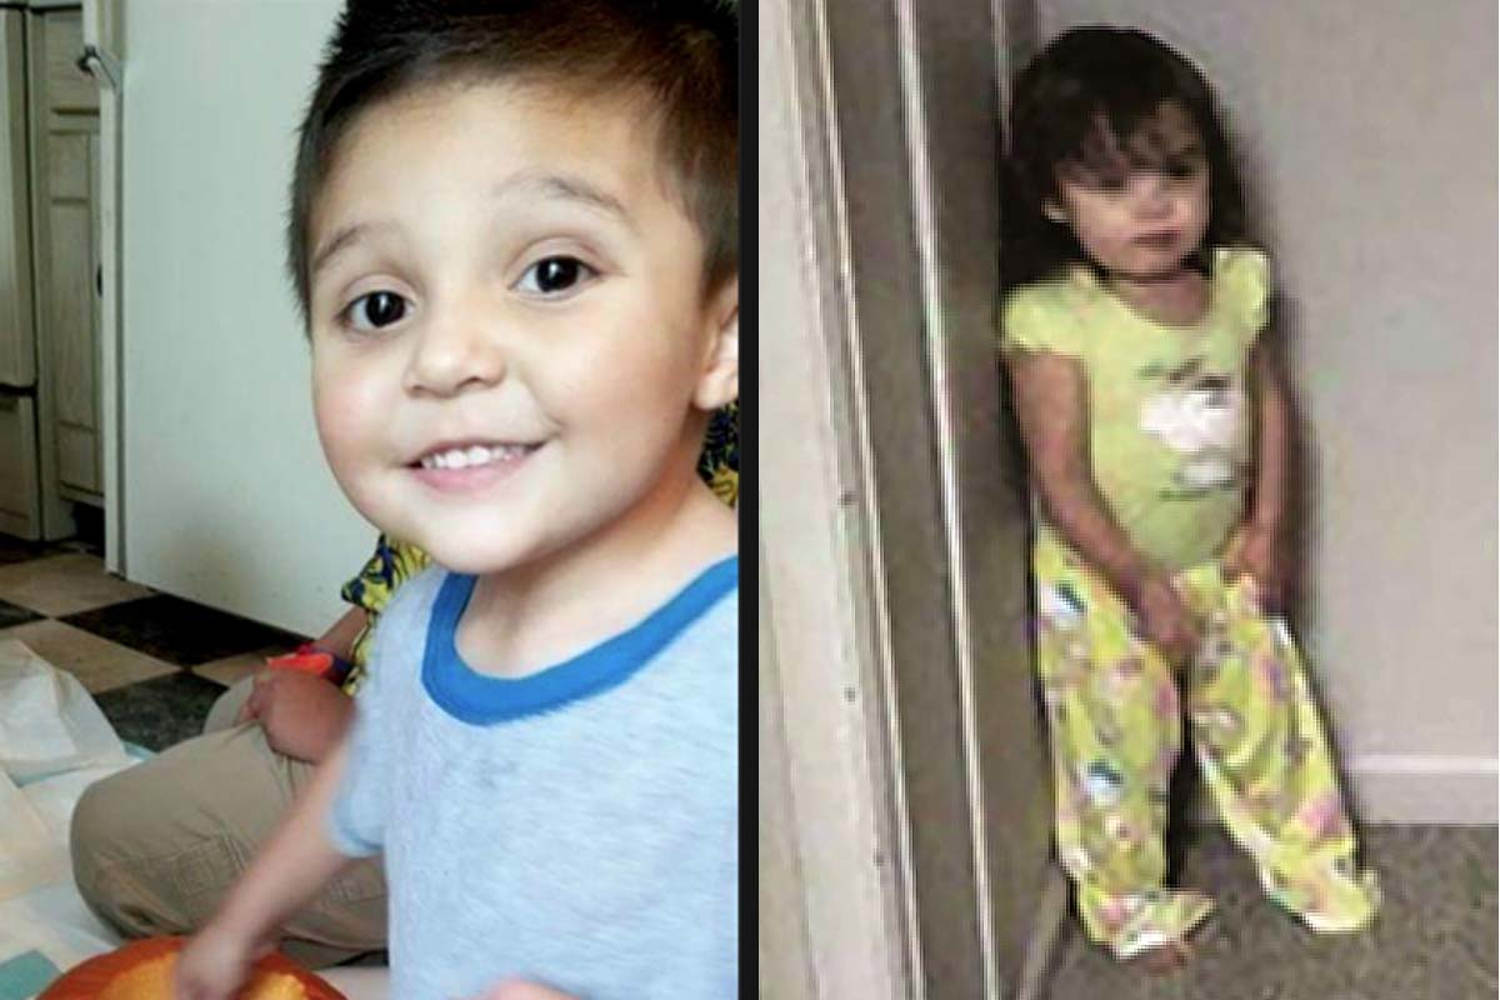 Pair held in deaths of 2 Colorado kids found in suitcase and concrete